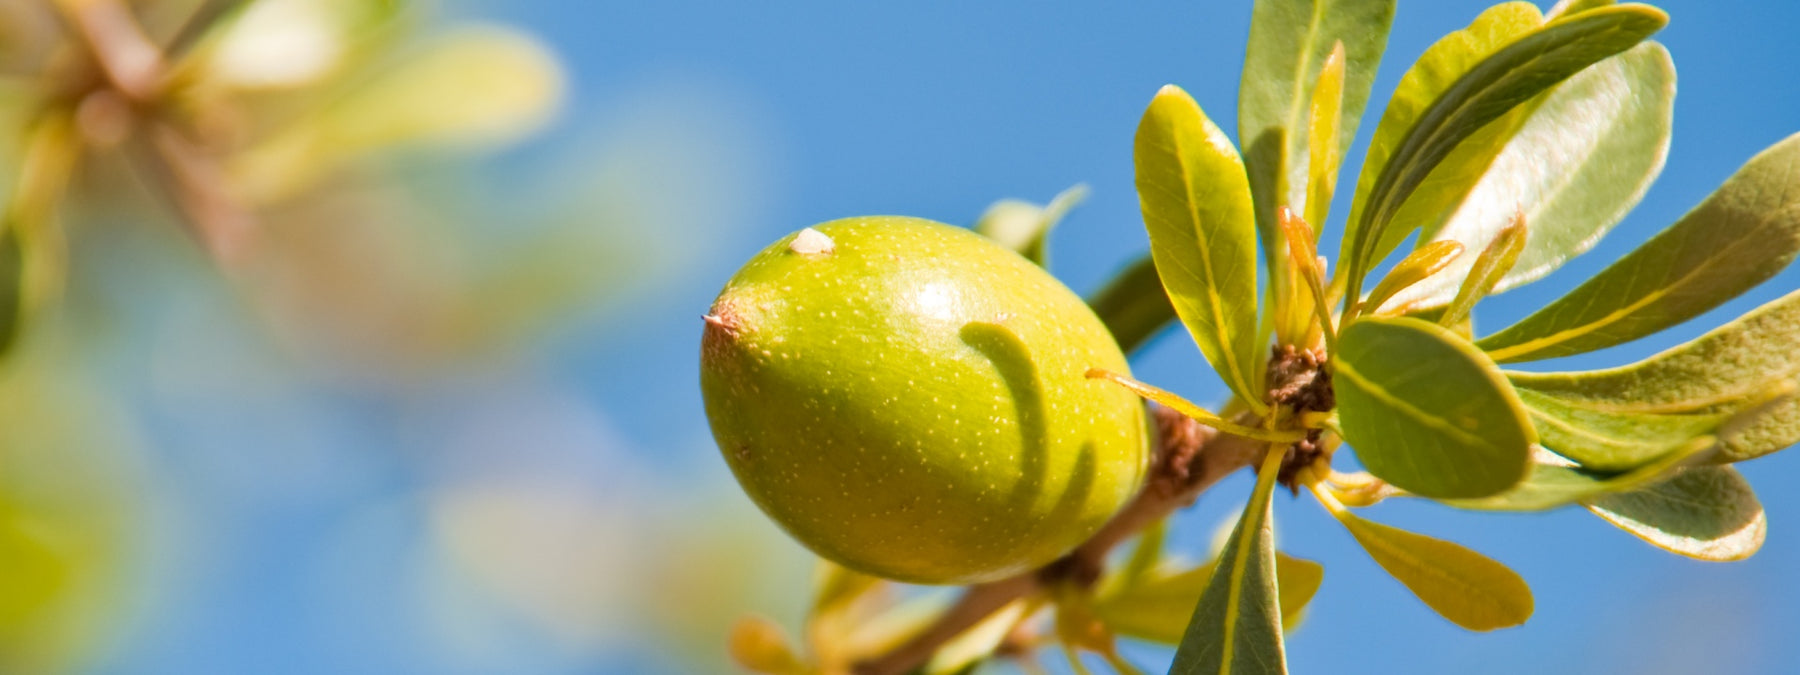 Argan Oil - Complete Guide to History, Uses, and Benefits